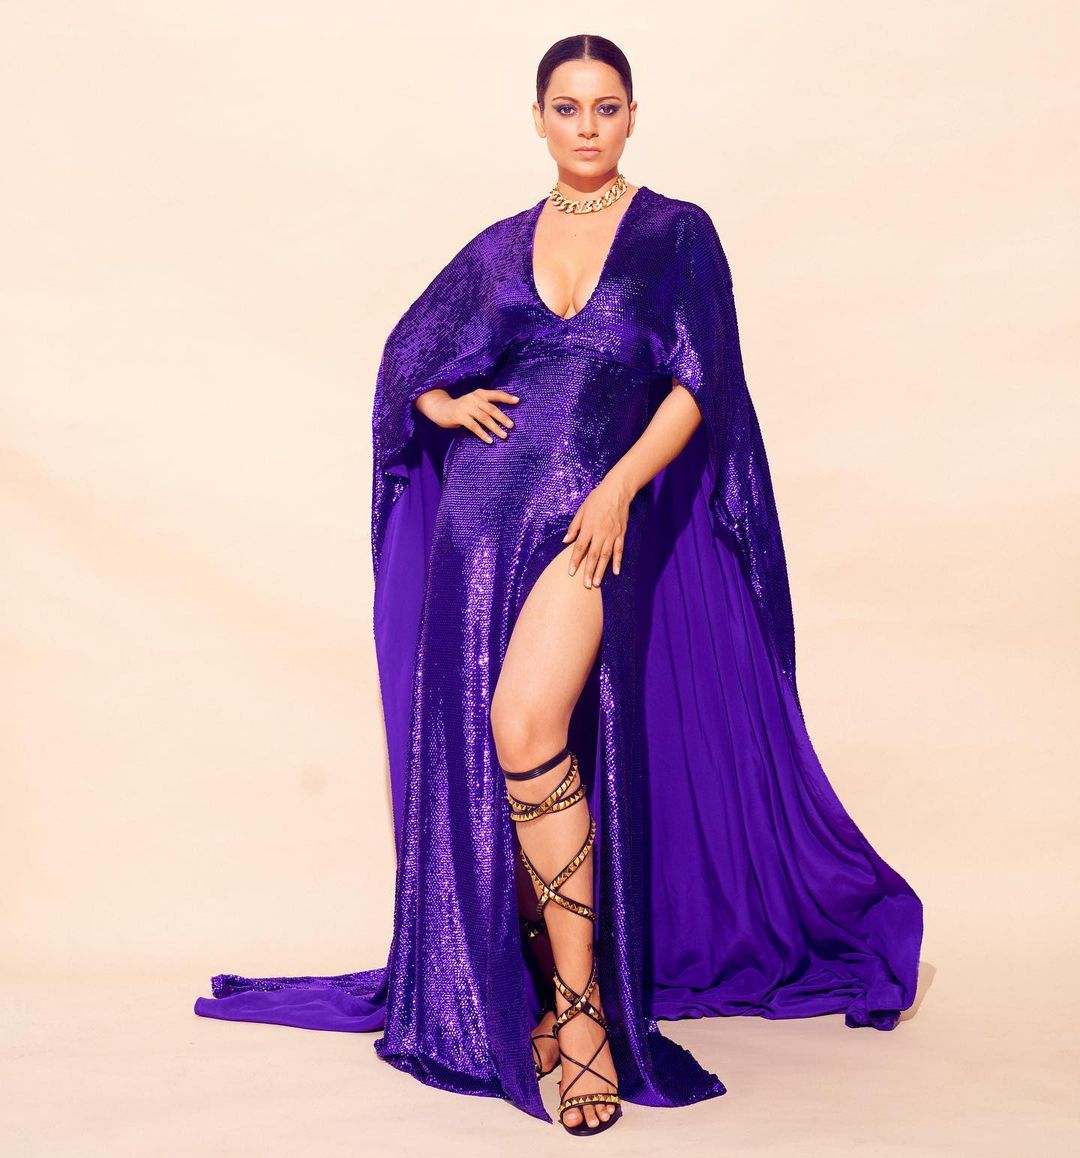 Kangana Ranaut Looks Regal In Sequinned Purple Caped Gown With Plunging Neckline